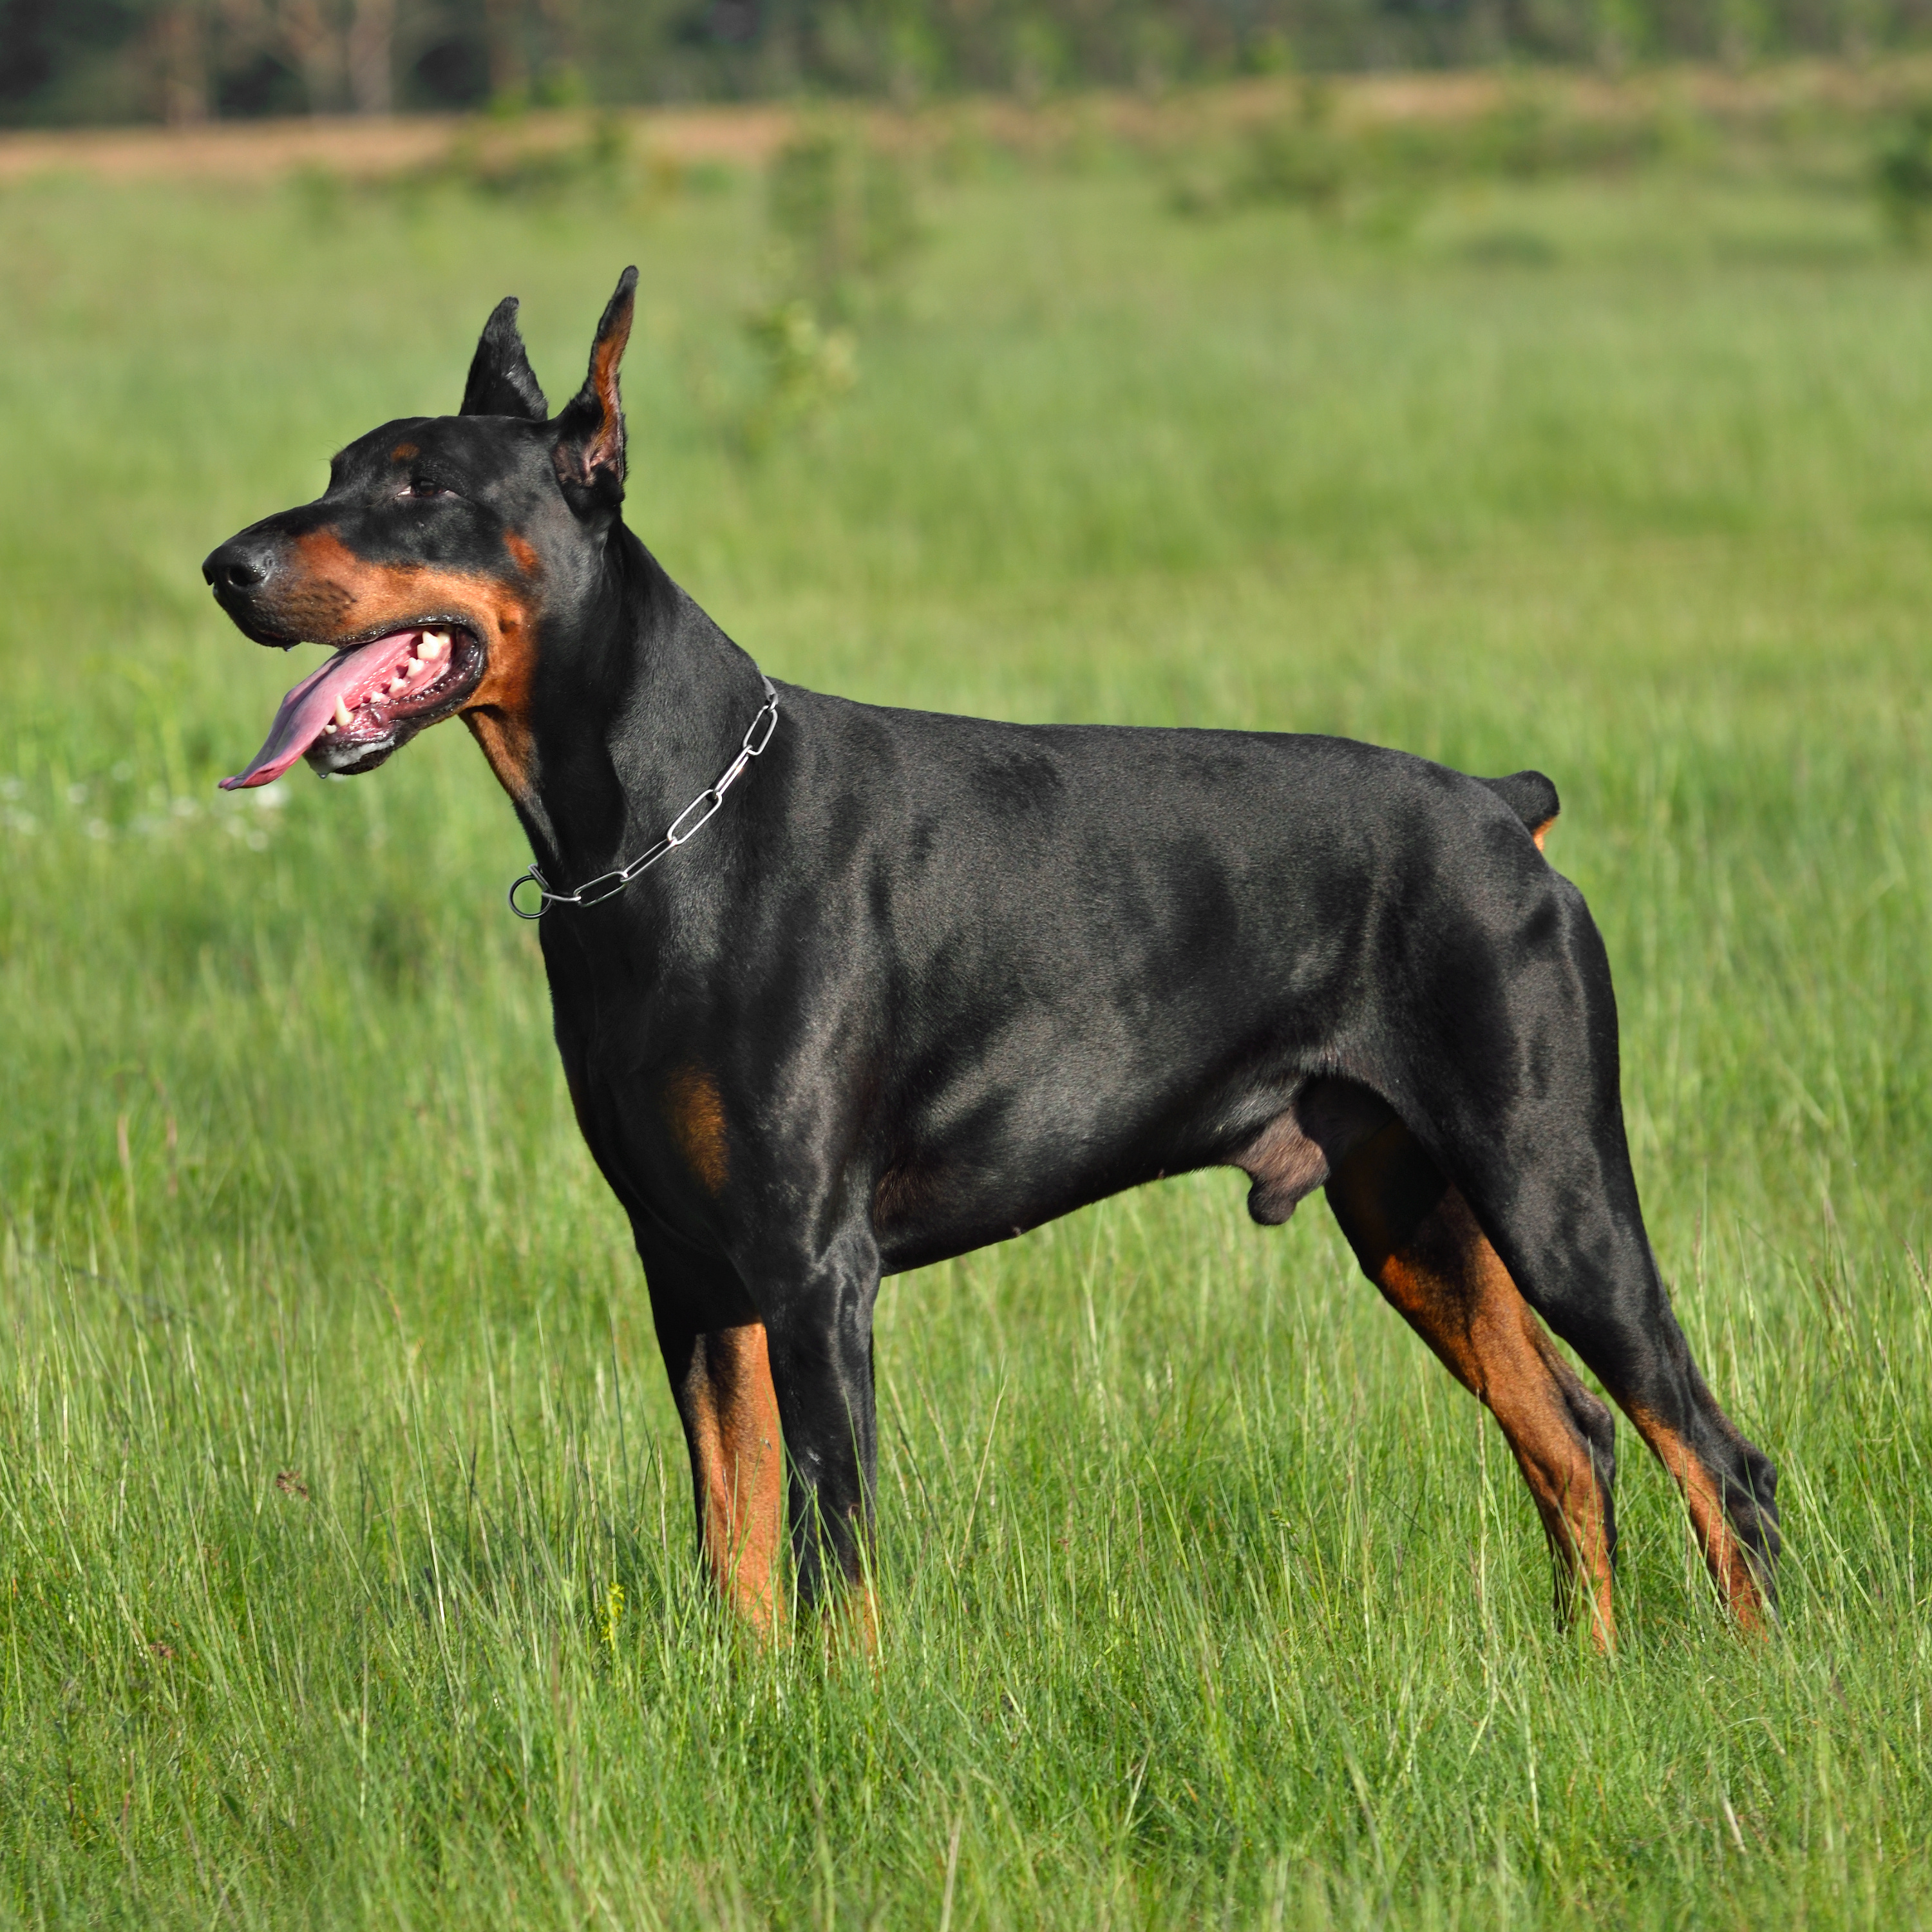 Dog Training Elite has expert Doberman training in Minneapolis / St. Paul, MN
																															 that are experienced in a variety of positive training methods for Dobermans.